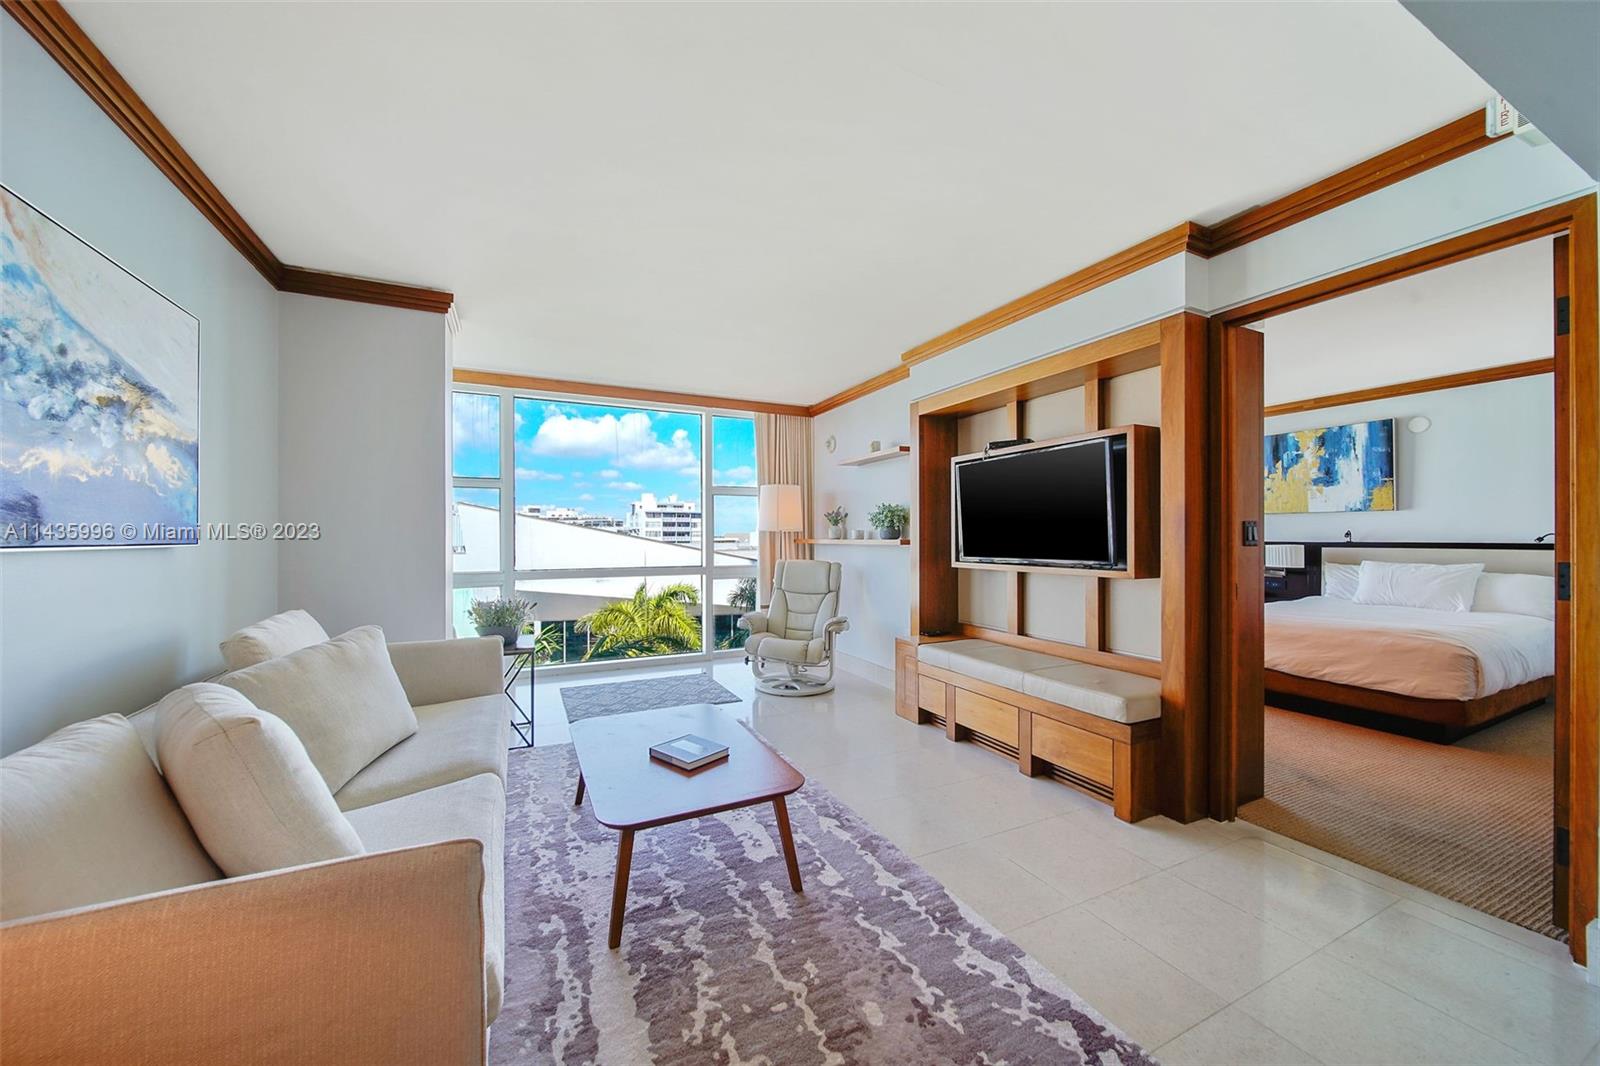 6801 Collins Ave 402, Miami Beach, Florida 33141, 1 Bedroom Bedrooms, ,1 BathroomBathrooms,Residential,For Sale,6801 Collins Ave 402,A11435996